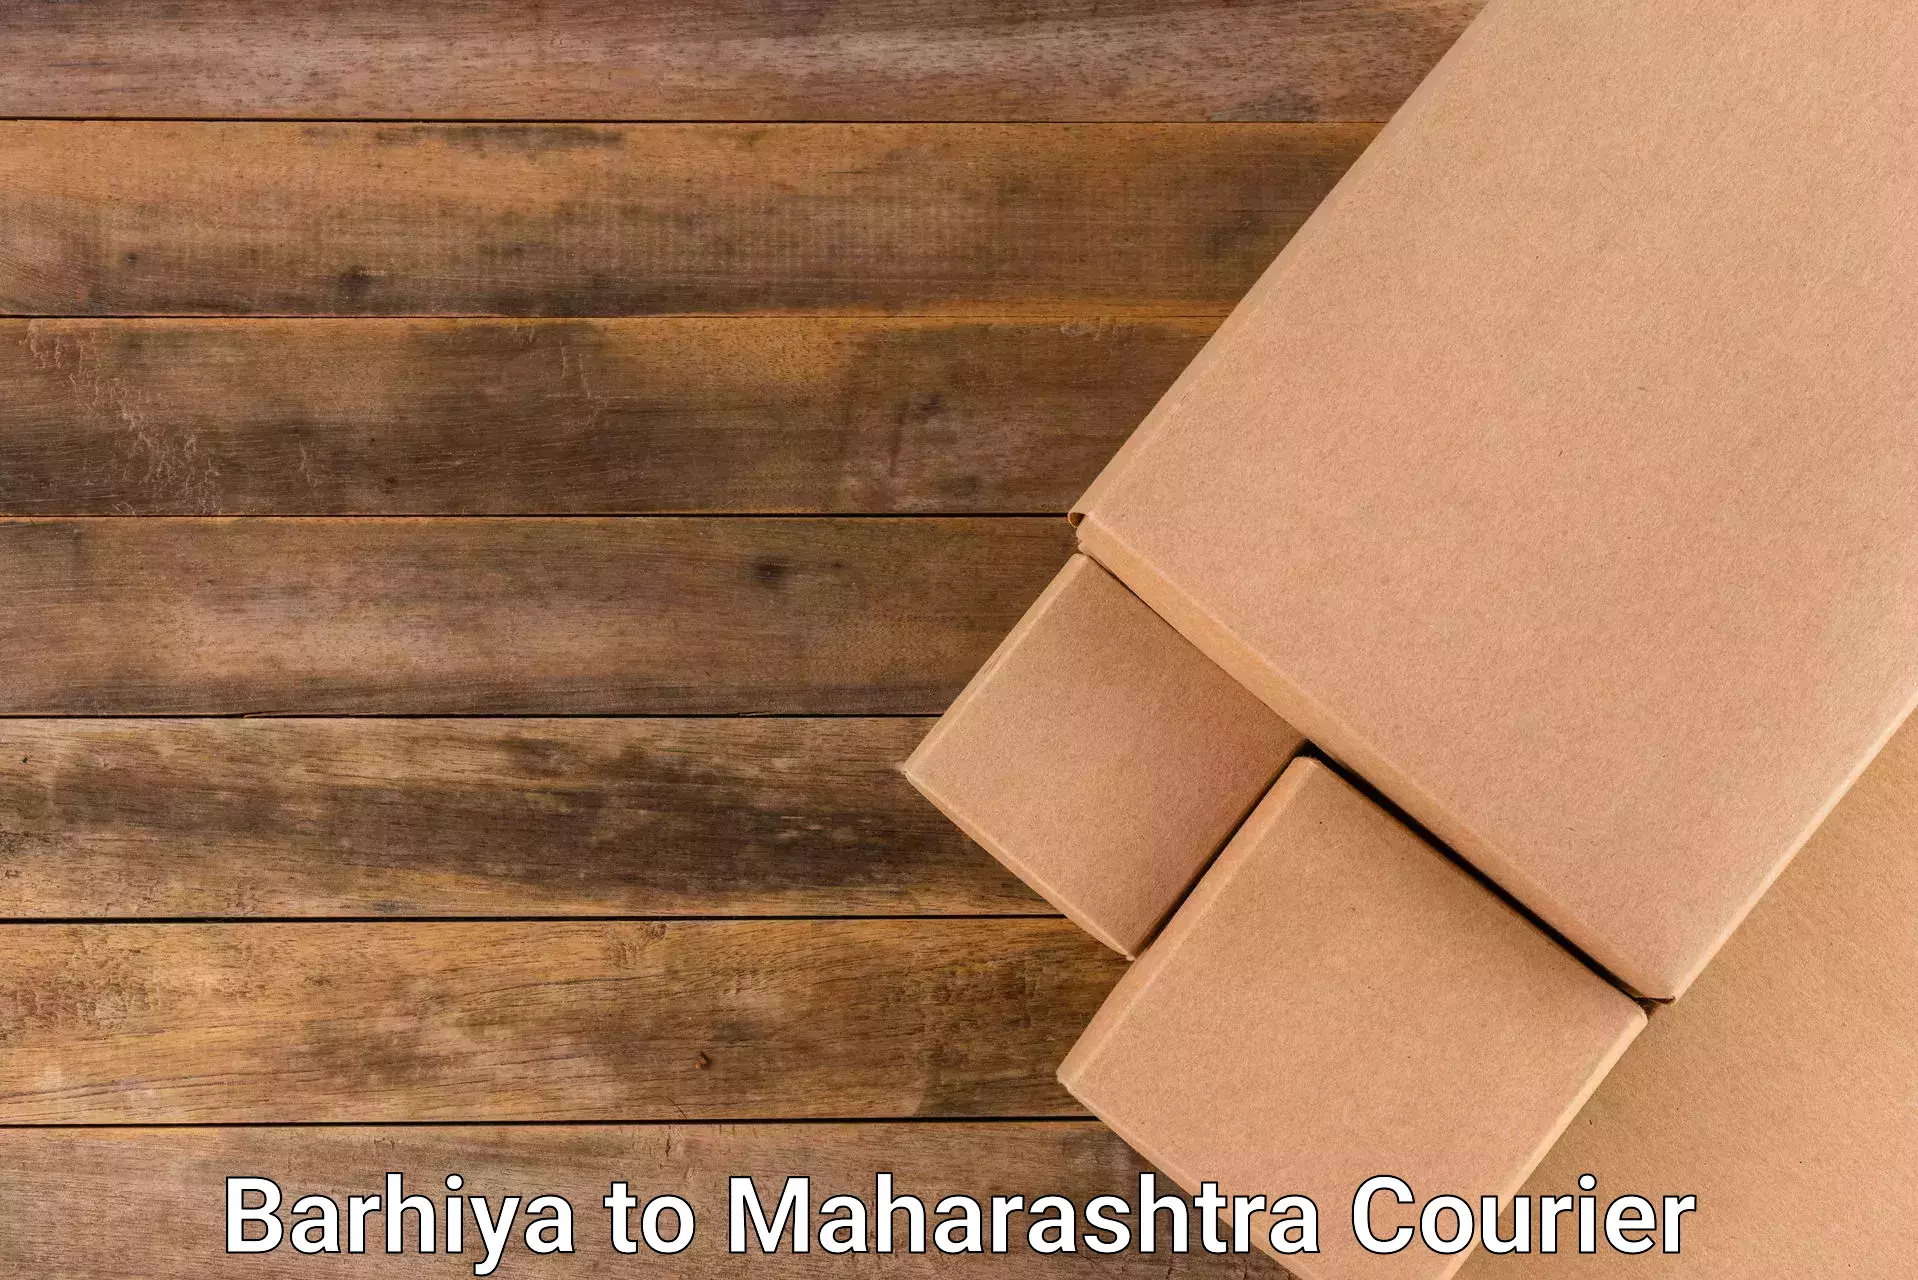 Reliable shipping partners Barhiya to SVKMs Narsee Monjee Institute of Management Studies Mumbai